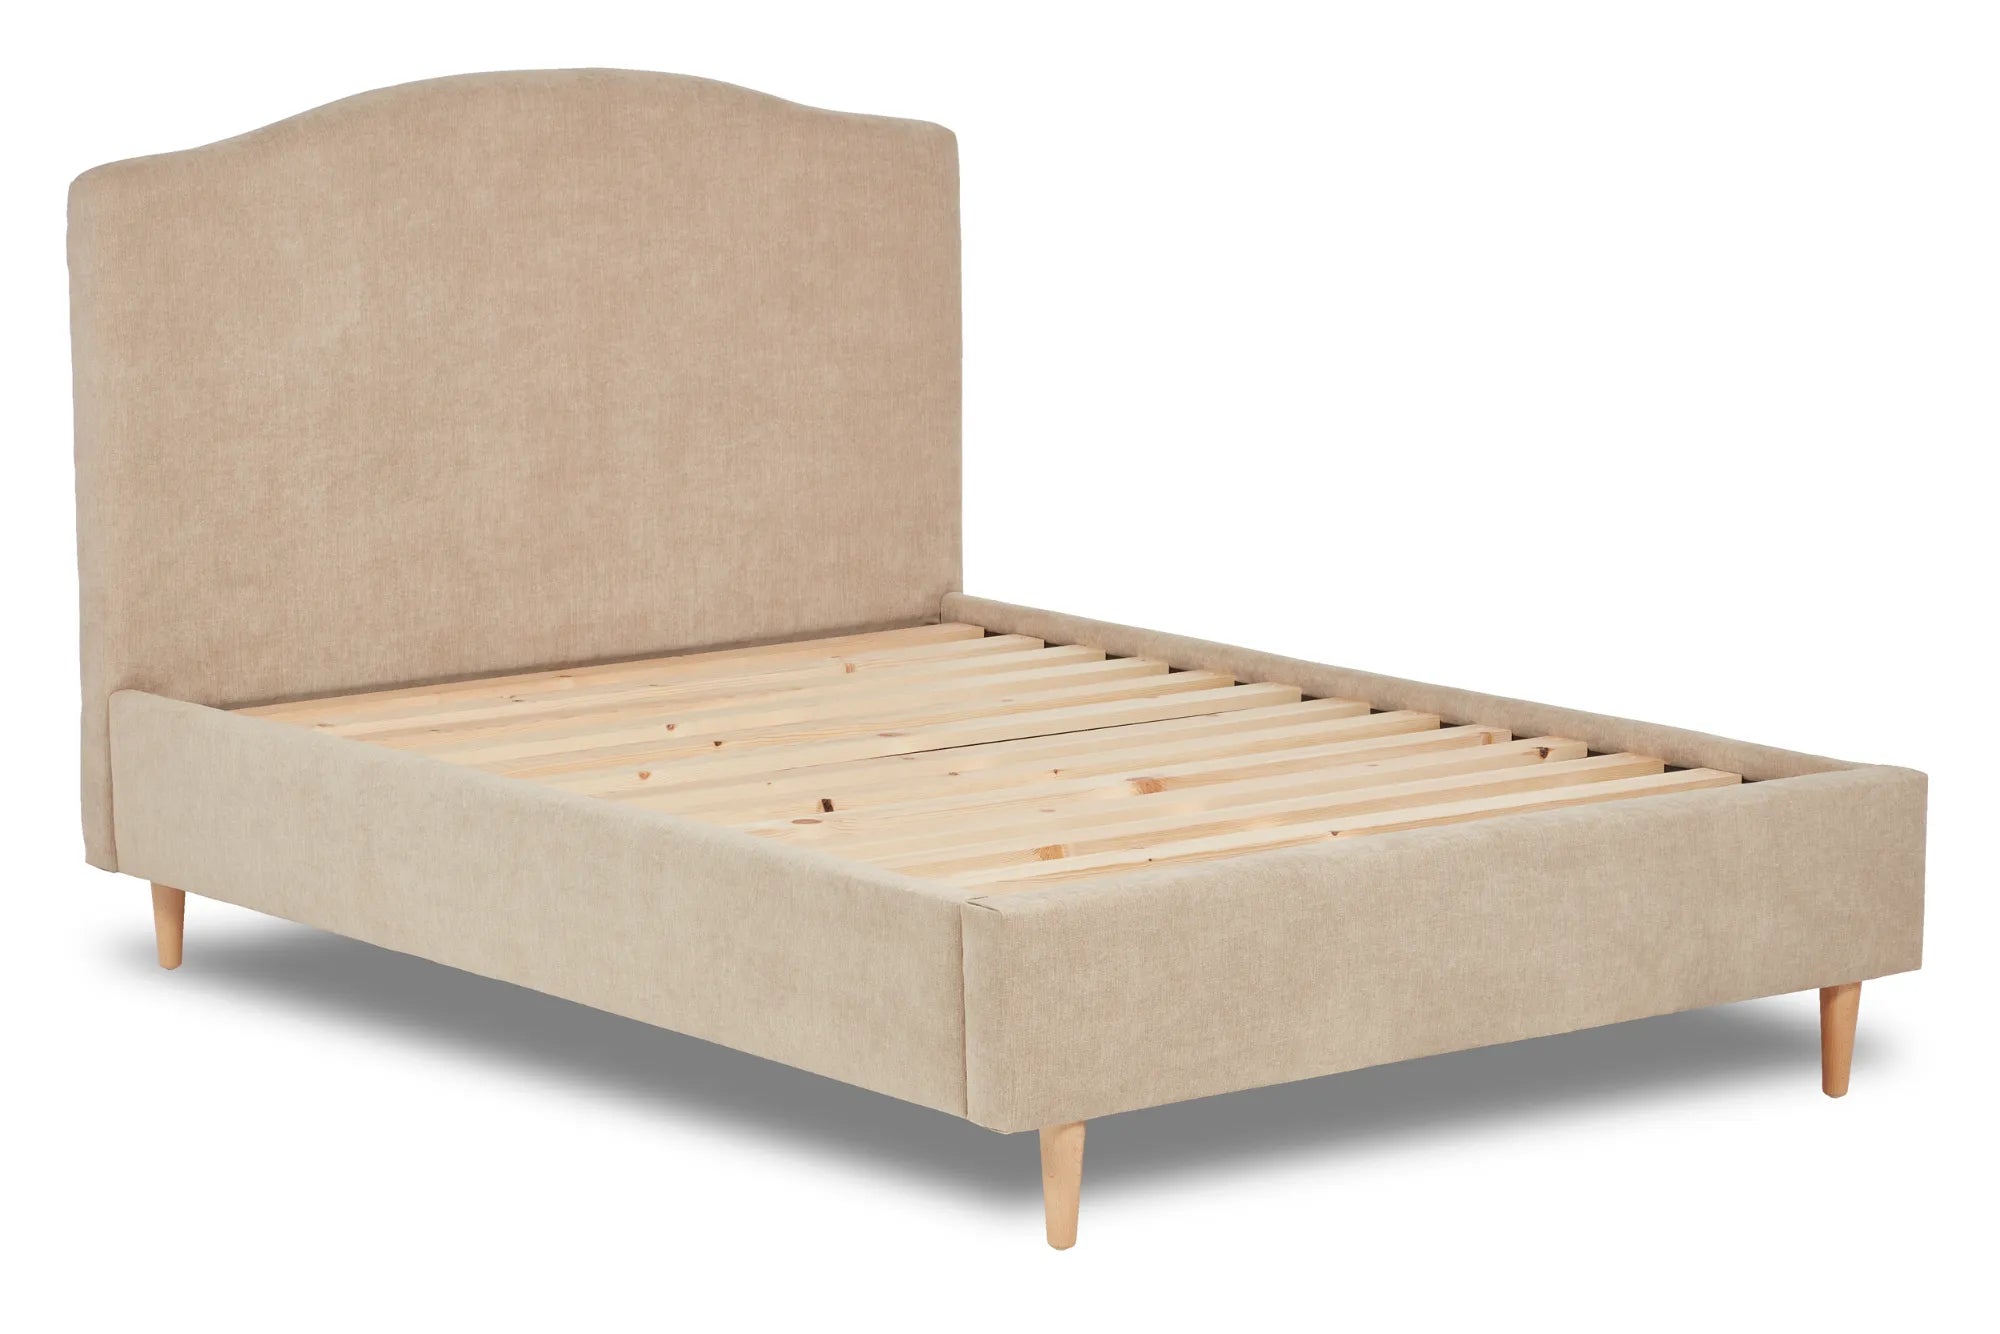 Ember Simple Shaped Fabric Bedstead